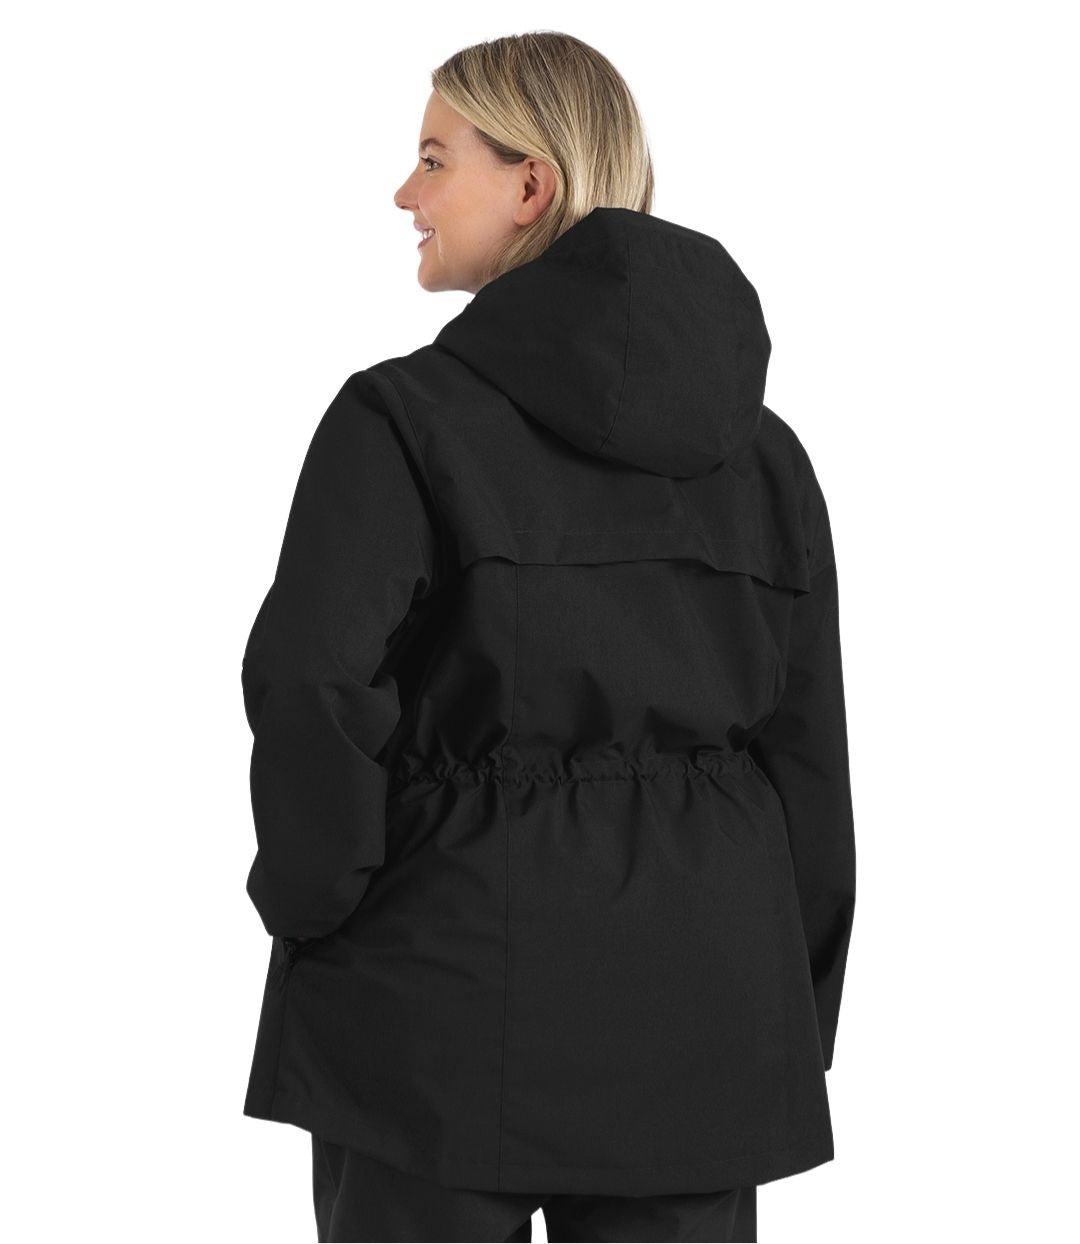 Plus size woman, back view, wearing a black JunoActive plus size wind and rain jacket. The jacket has a cinched waist, hood, double front closure and side pockets. The length of the plus size jacket hits just below the hips.